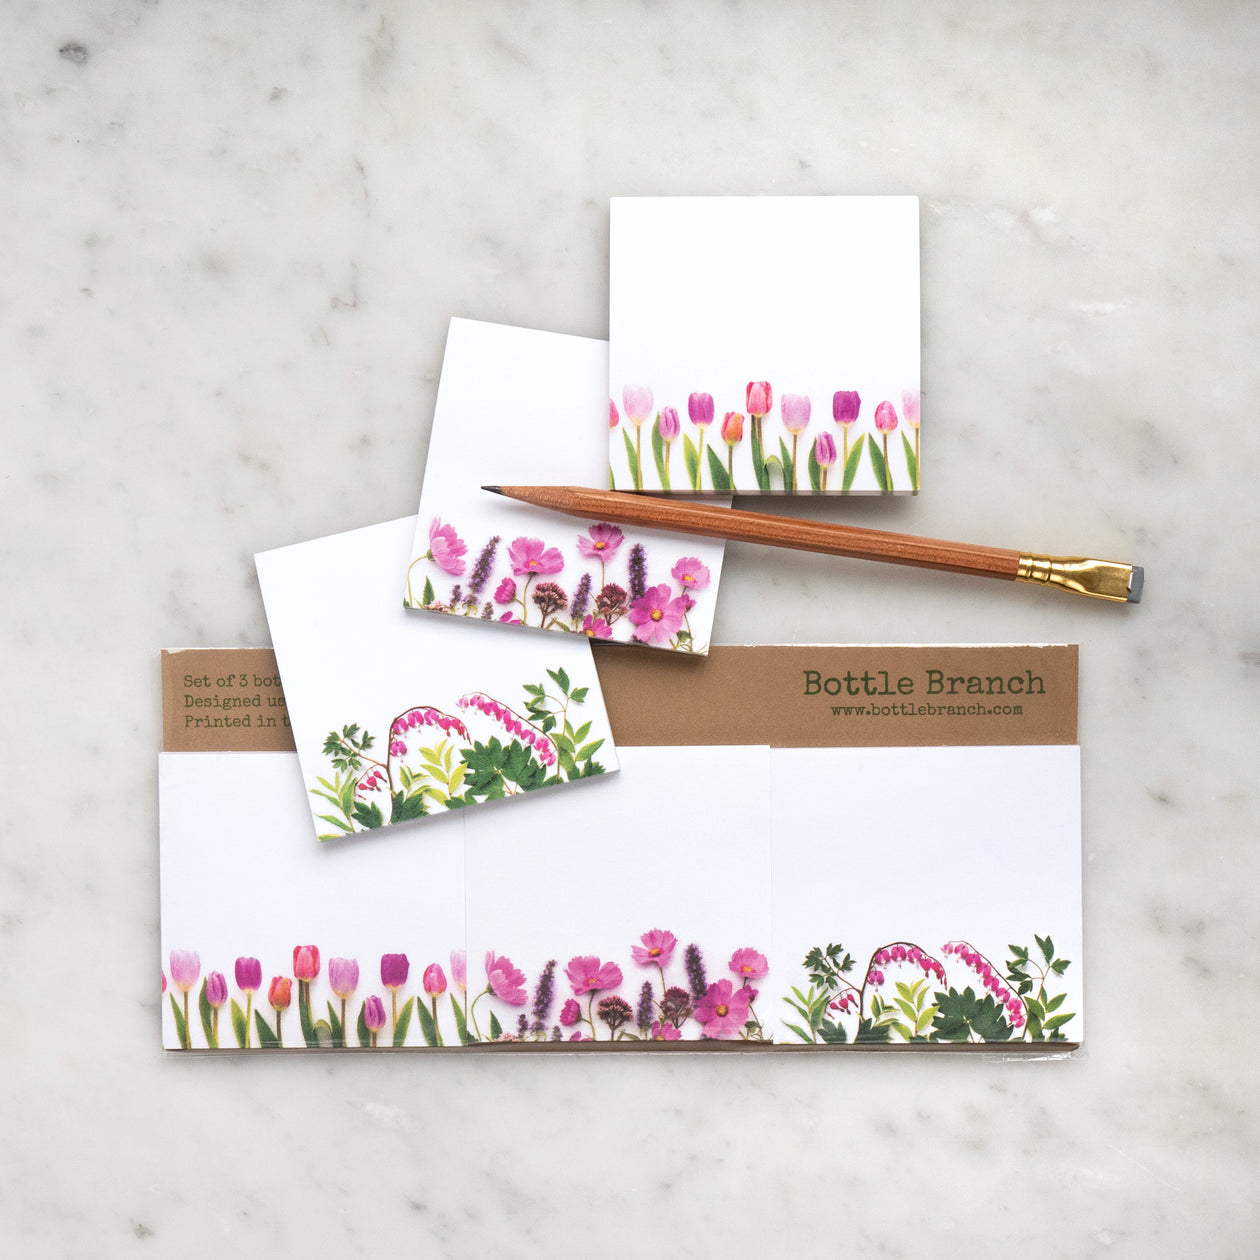 Sticky notes - Pink & green